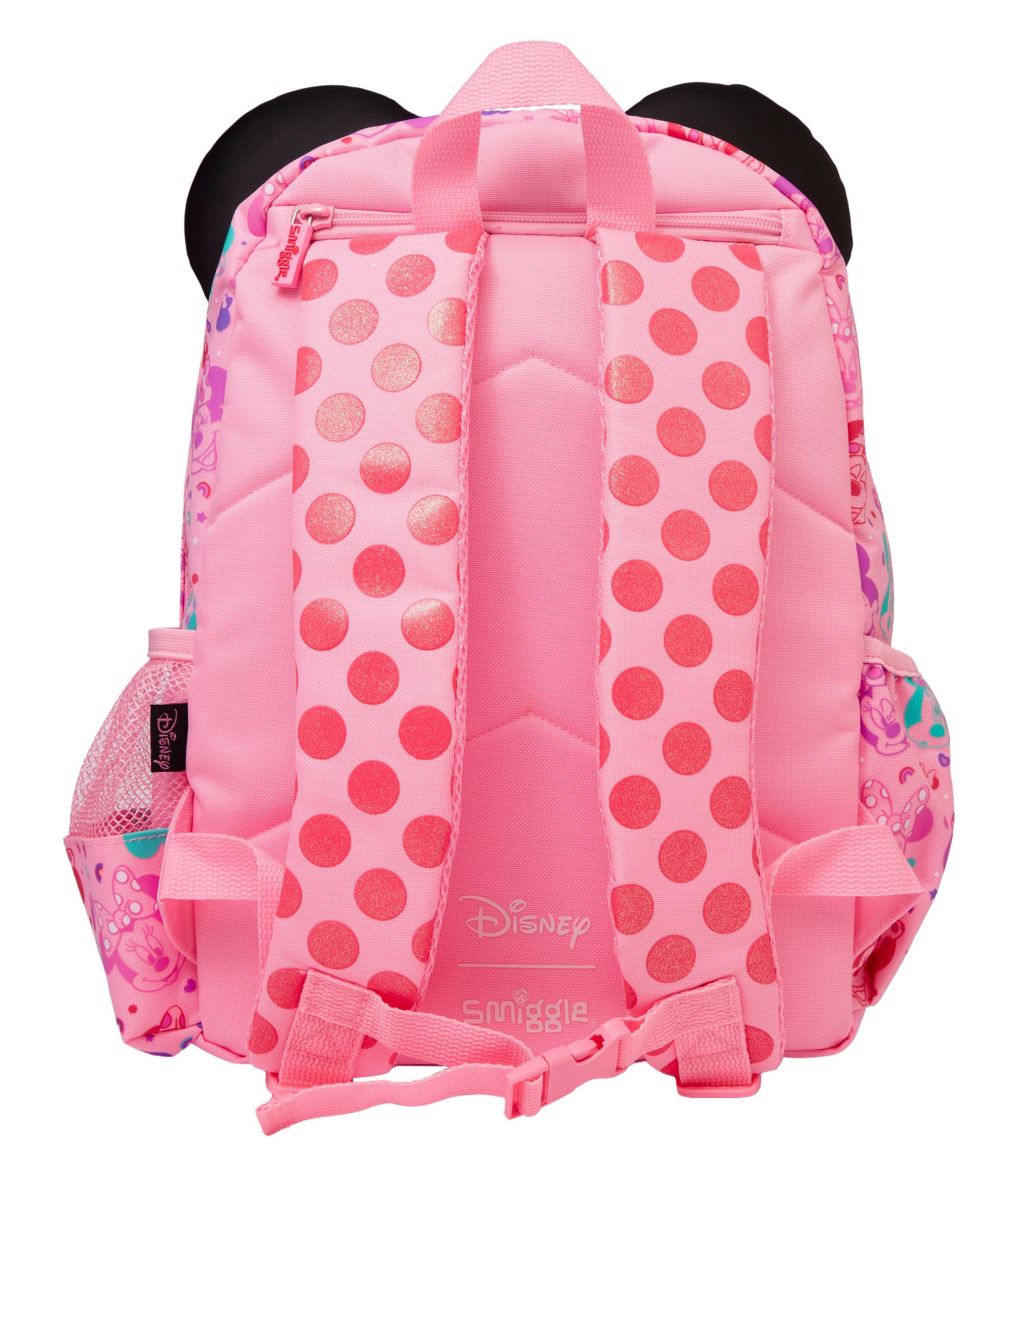 Kids' Minnie Mouse™ Hooded Backpack image 2